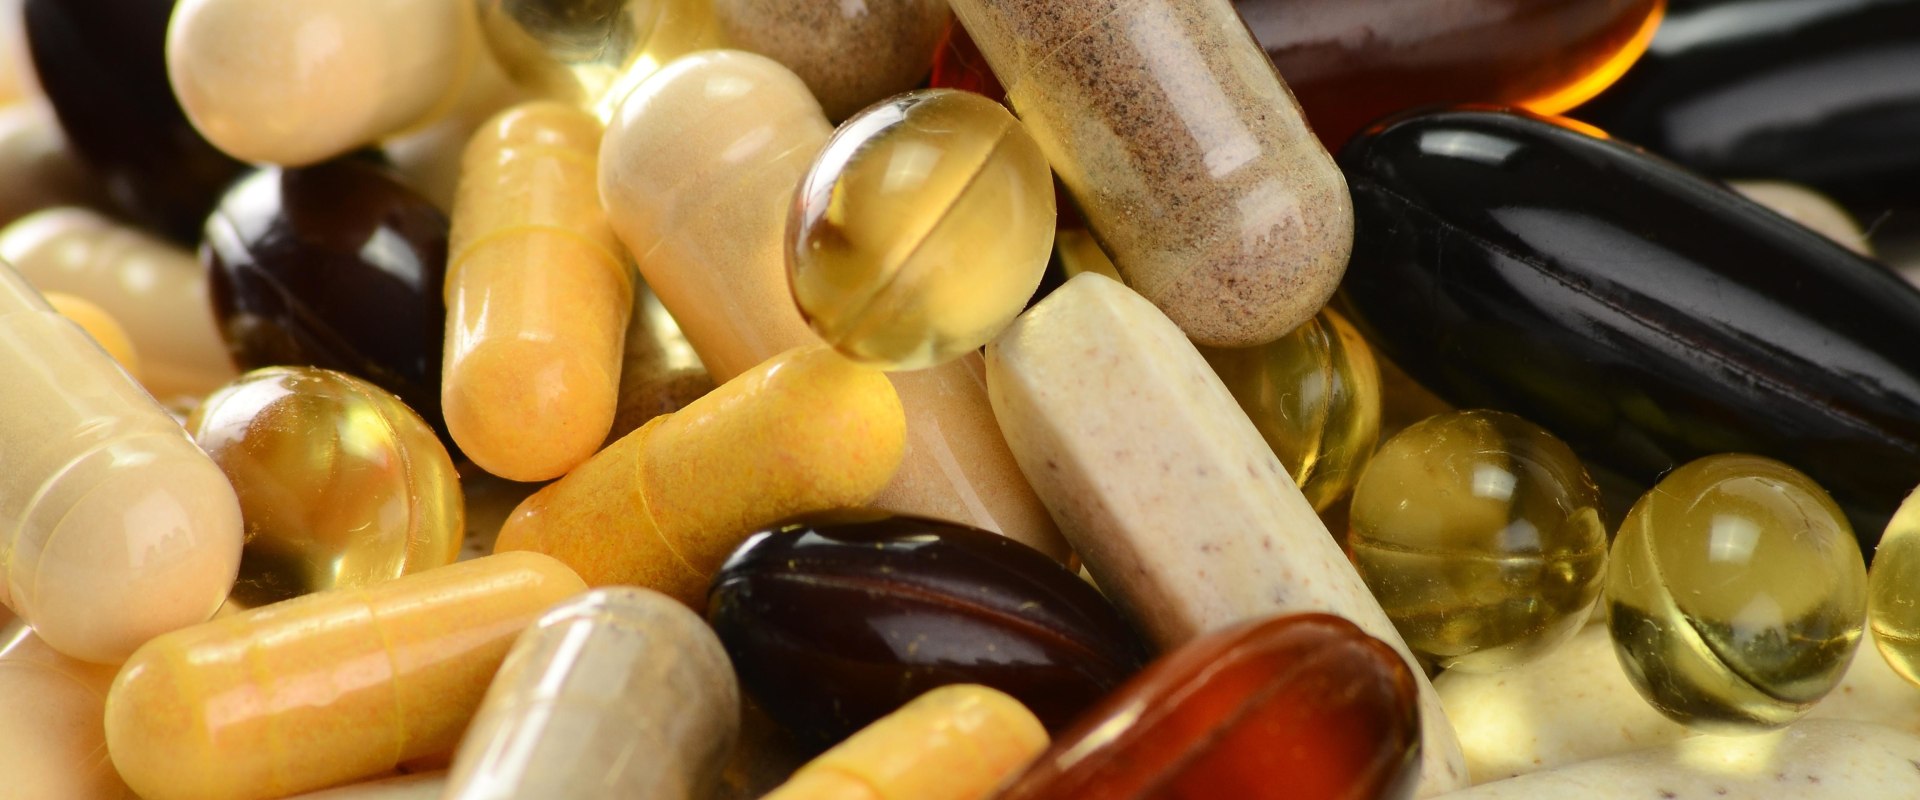 What law regulates the manufacturing and sales of supplements in the united states?